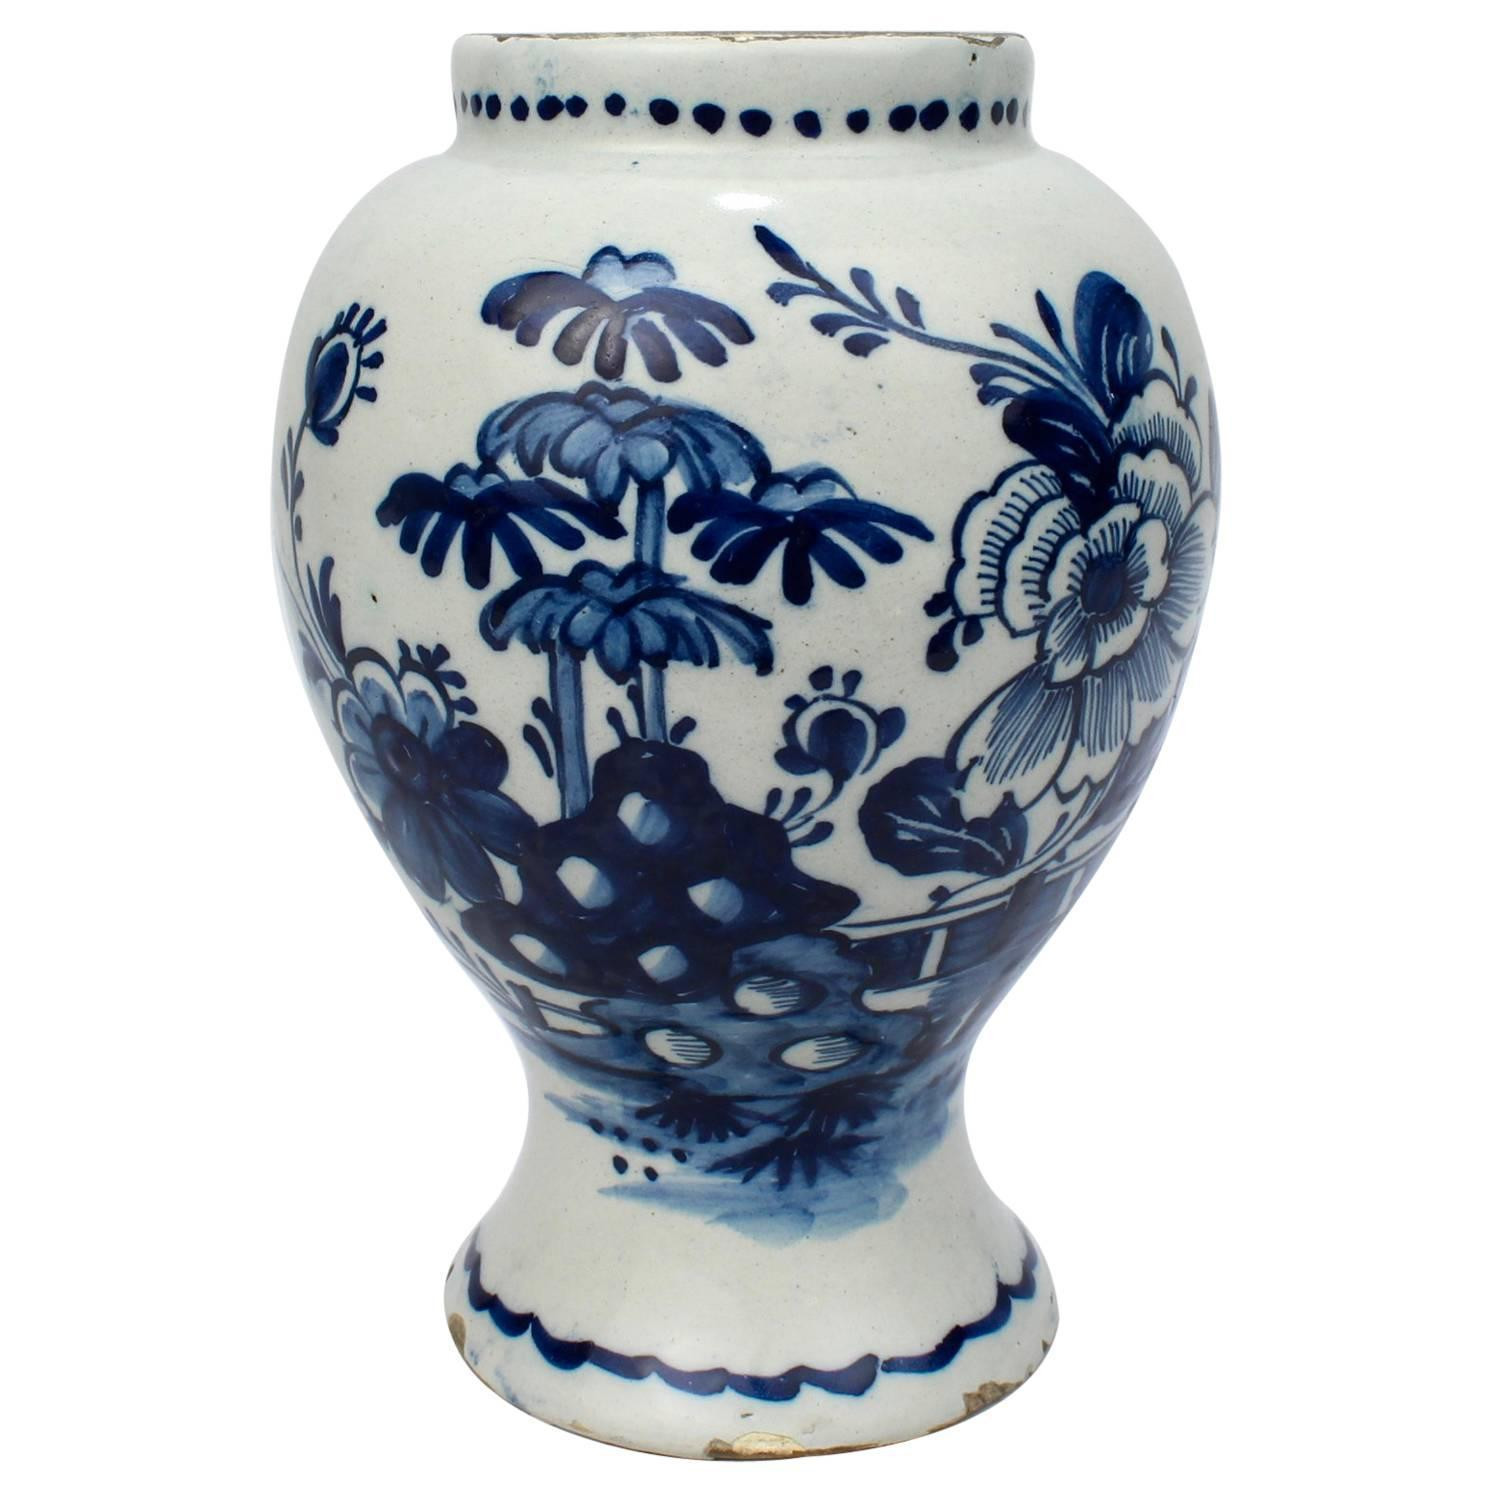 21 Unique Hand Painted Delft Holland Bud Vase 2022 free download hand painted delft holland bud vase of ginger jar shaped vase in celery and rough sand glaze for sale at in ginger jar shaped vase in celery and rough sand glaze for sale at 1stdibs